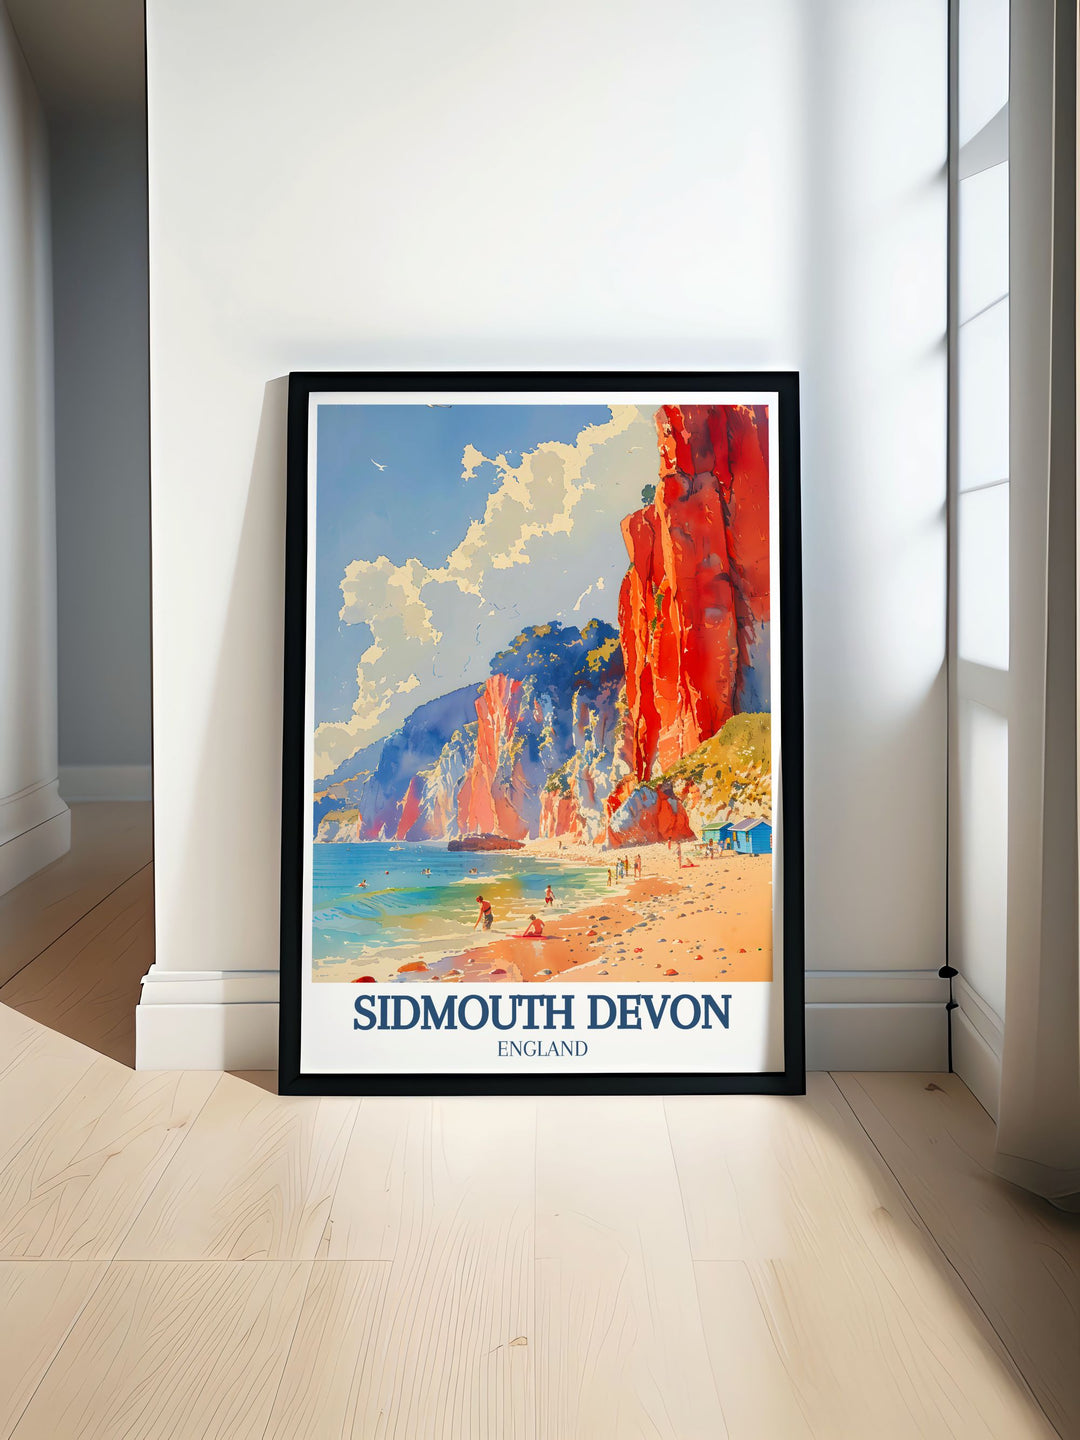 The Regency Promenade in Sidmouth is beautifully illustrated in this poster, highlighting its historic charm and vibrant flower displays, making it an excellent addition for those who appreciate coastal elegance and leisurely strolls.